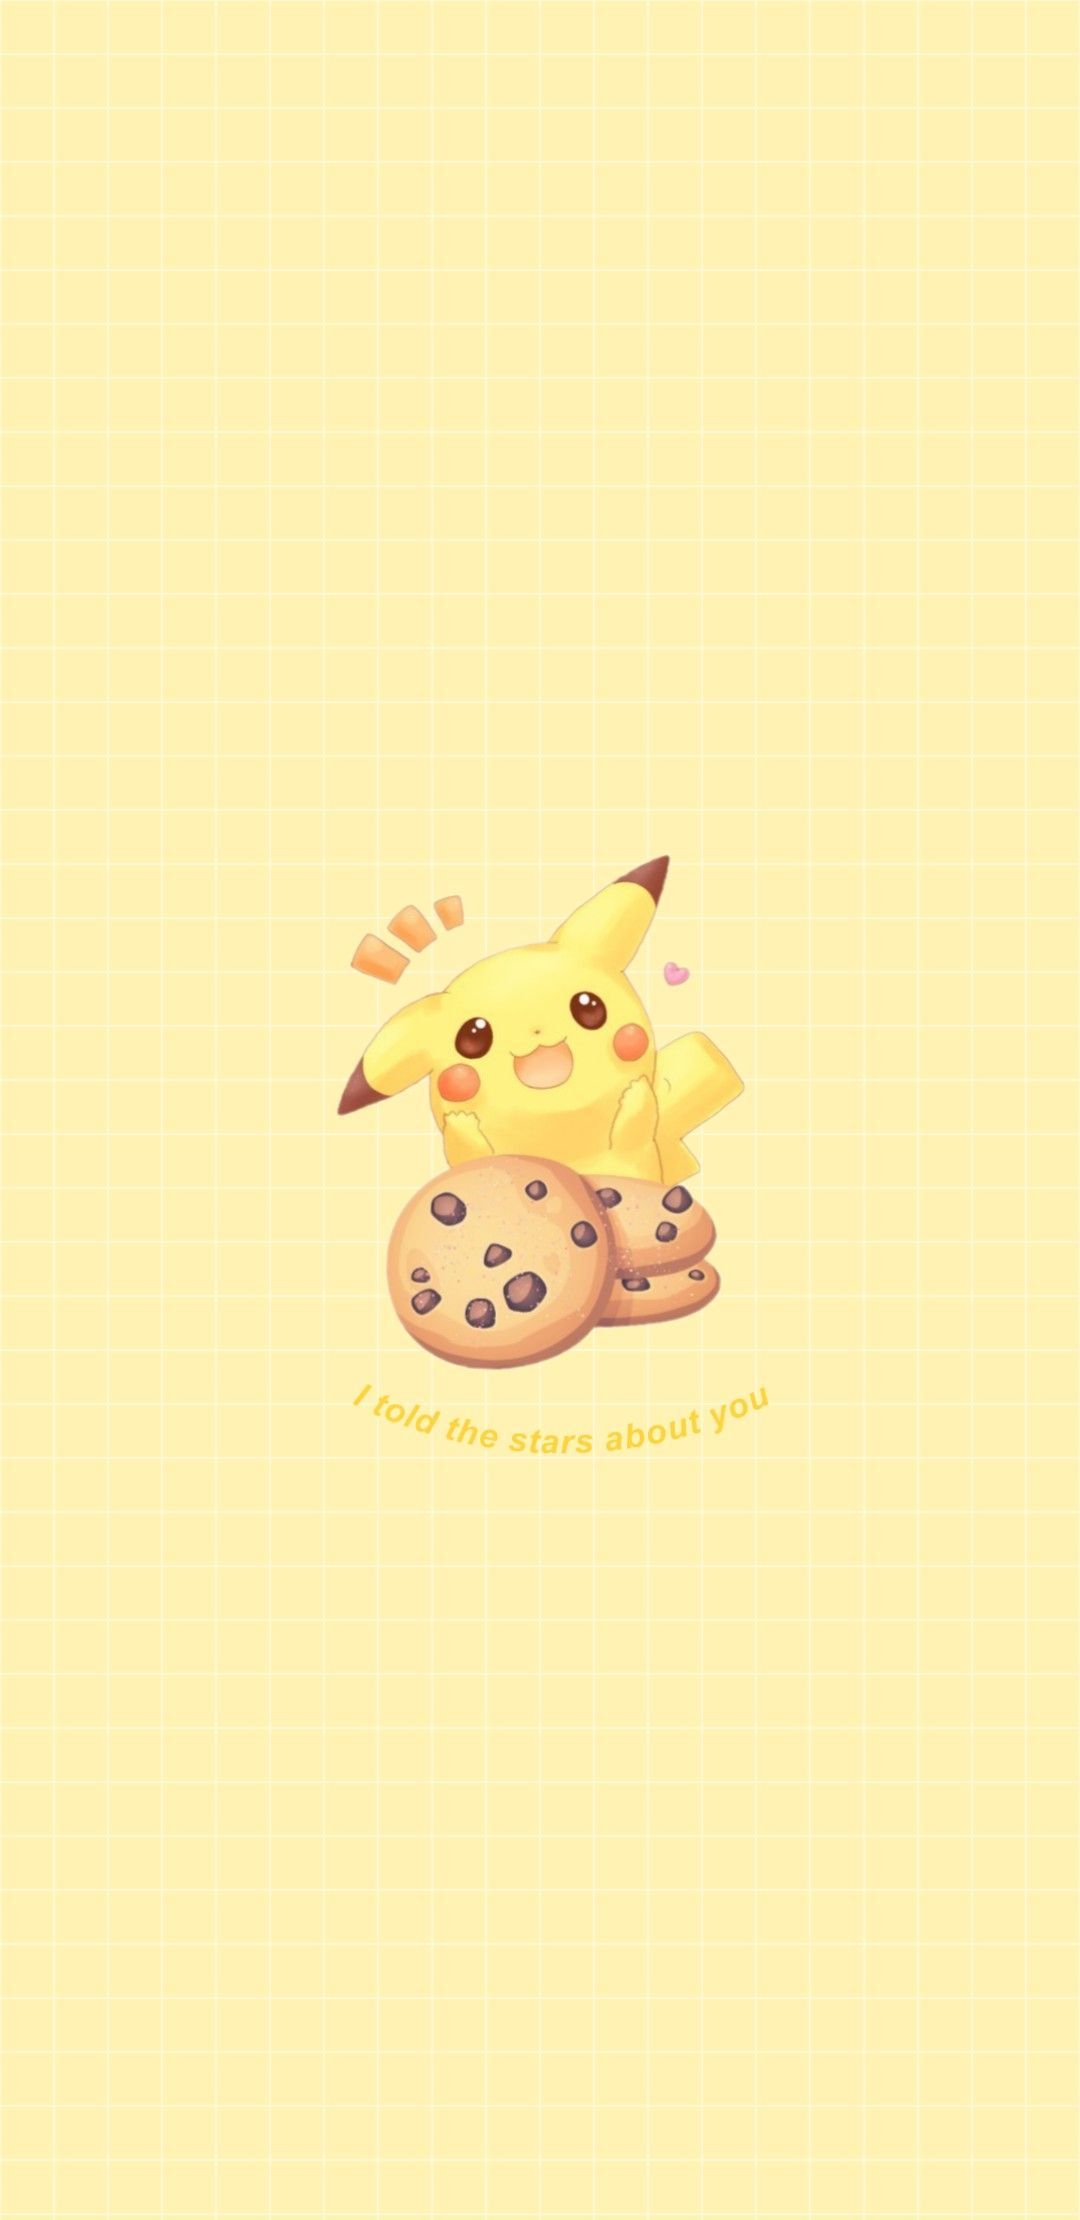 A yellow background with pikachu and cookies - Pikachu